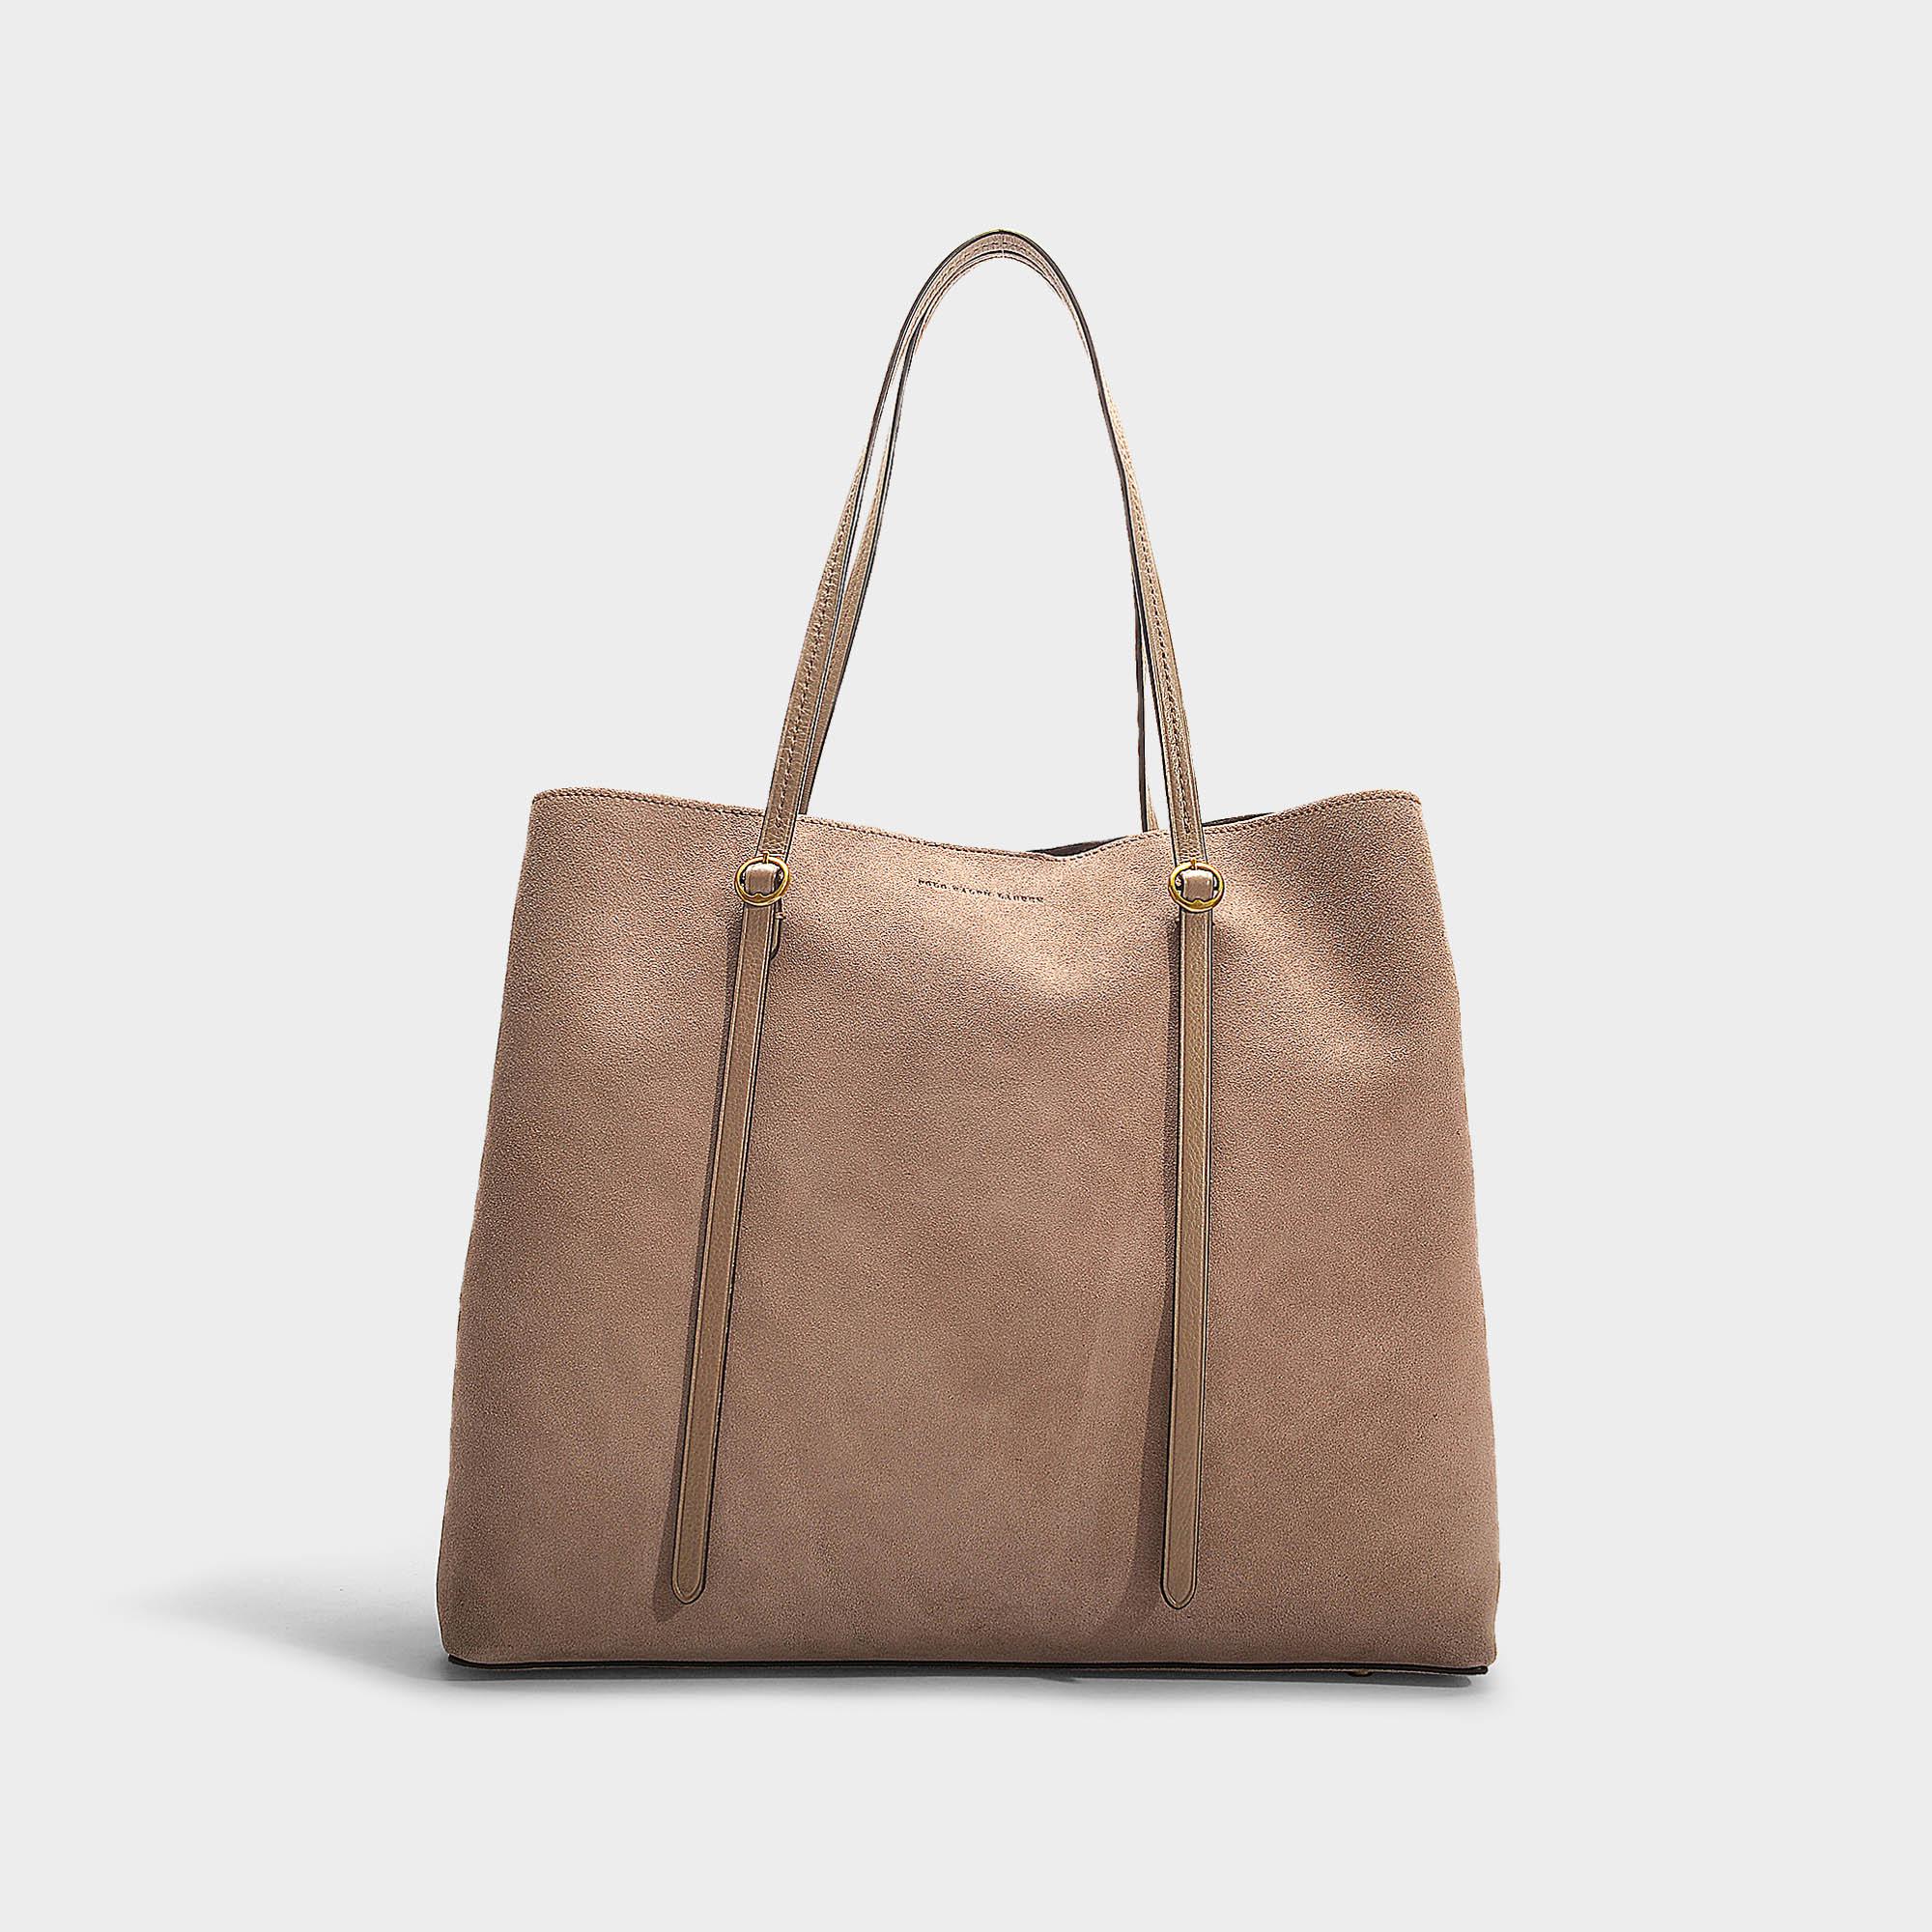 polo ralph lauren lennox tote > Up to 62% OFF > Free shipping